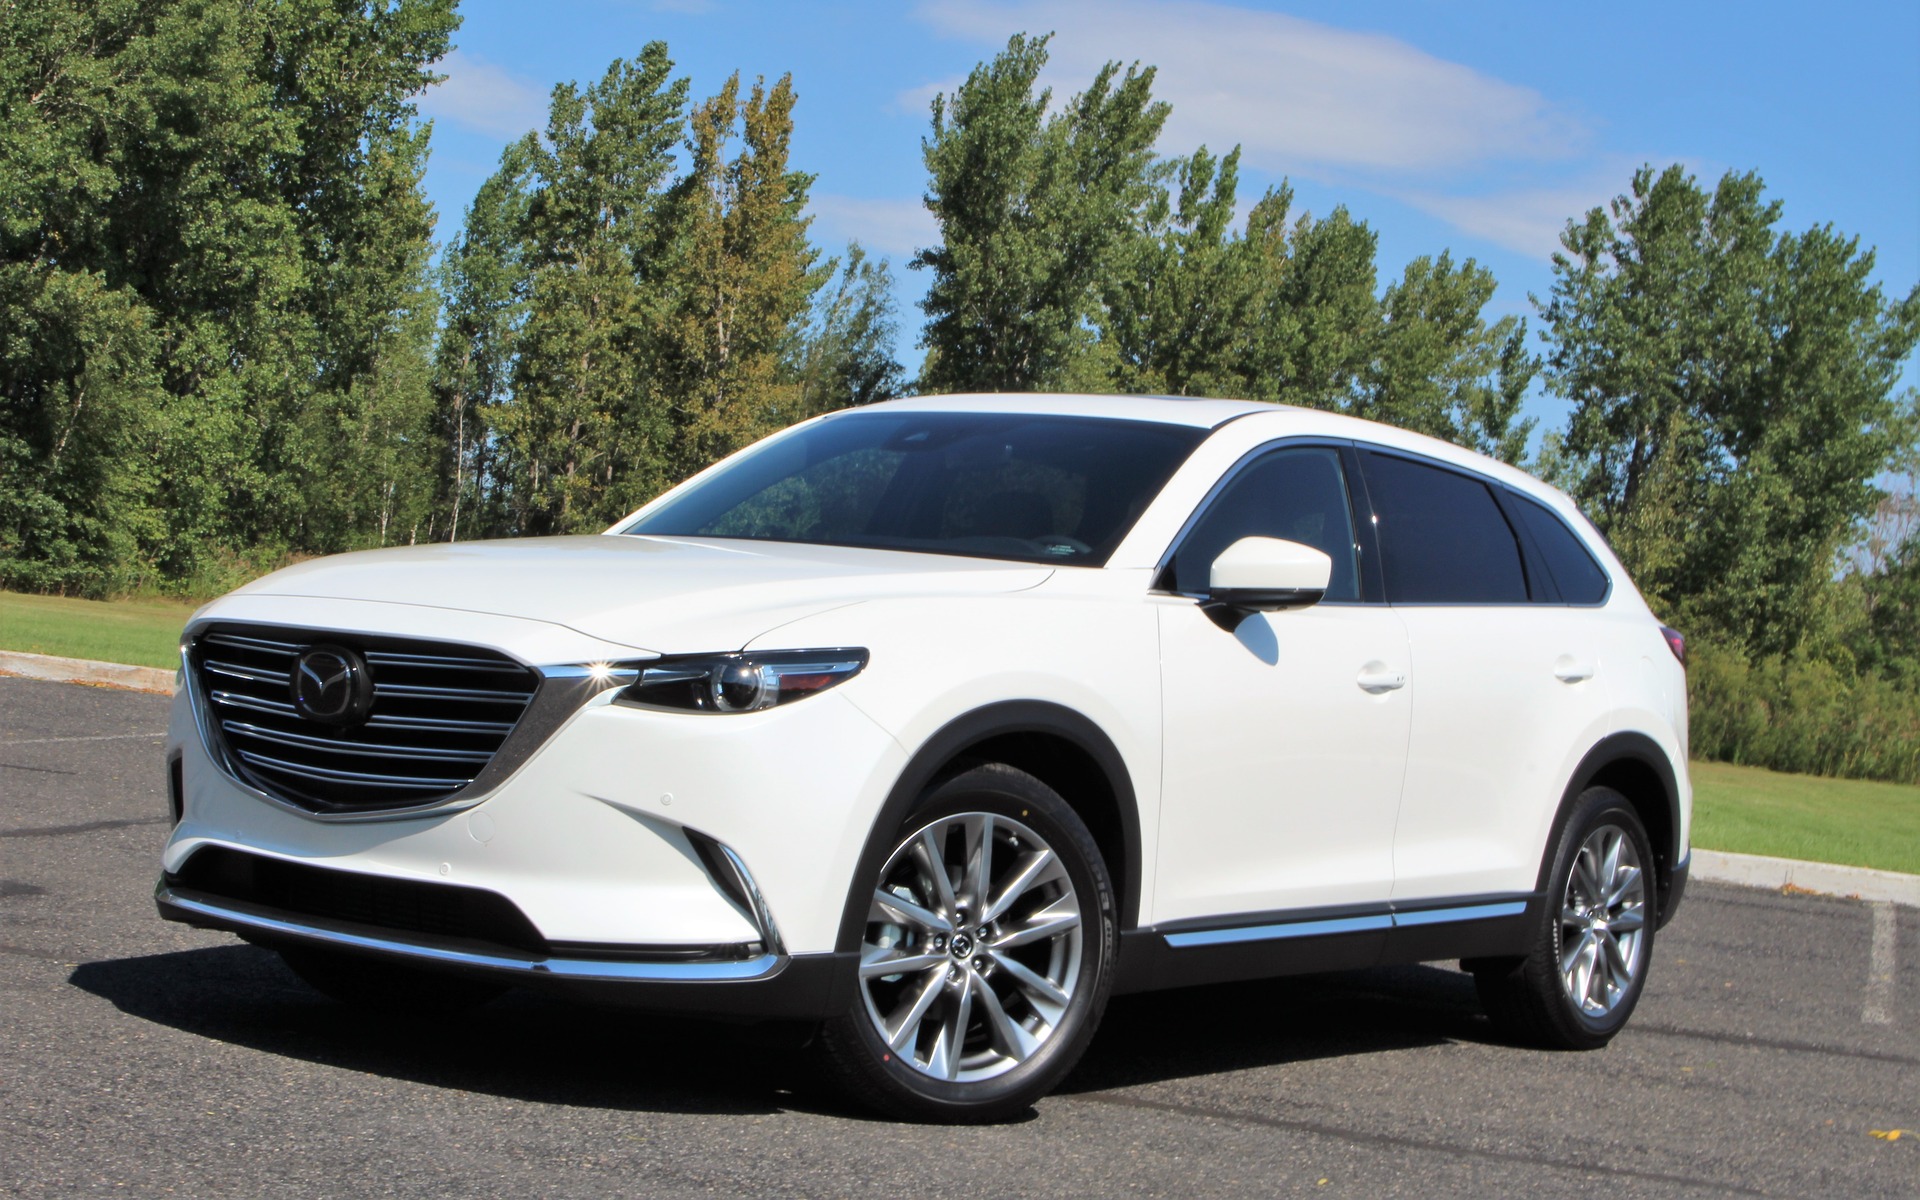 2019 Mazda Cx 9 The Gymnast The Car Guide